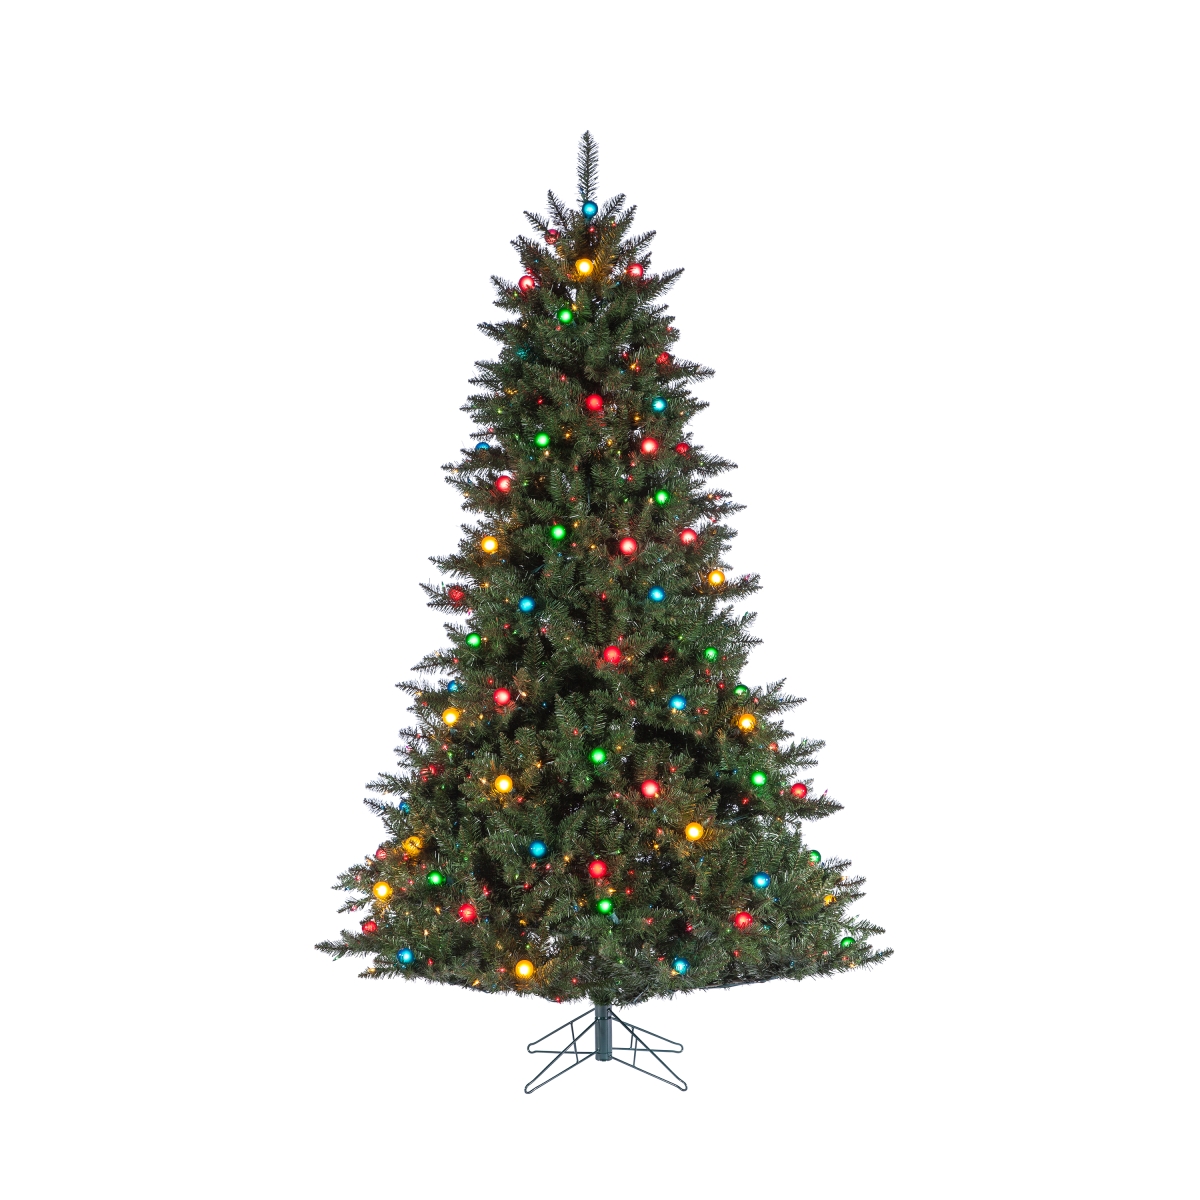 5767--75m 7.5 Ft. Pre-lit Reno Pine Tree With 100 G40 Glass Bulbs & 750 Multi-colored Lights